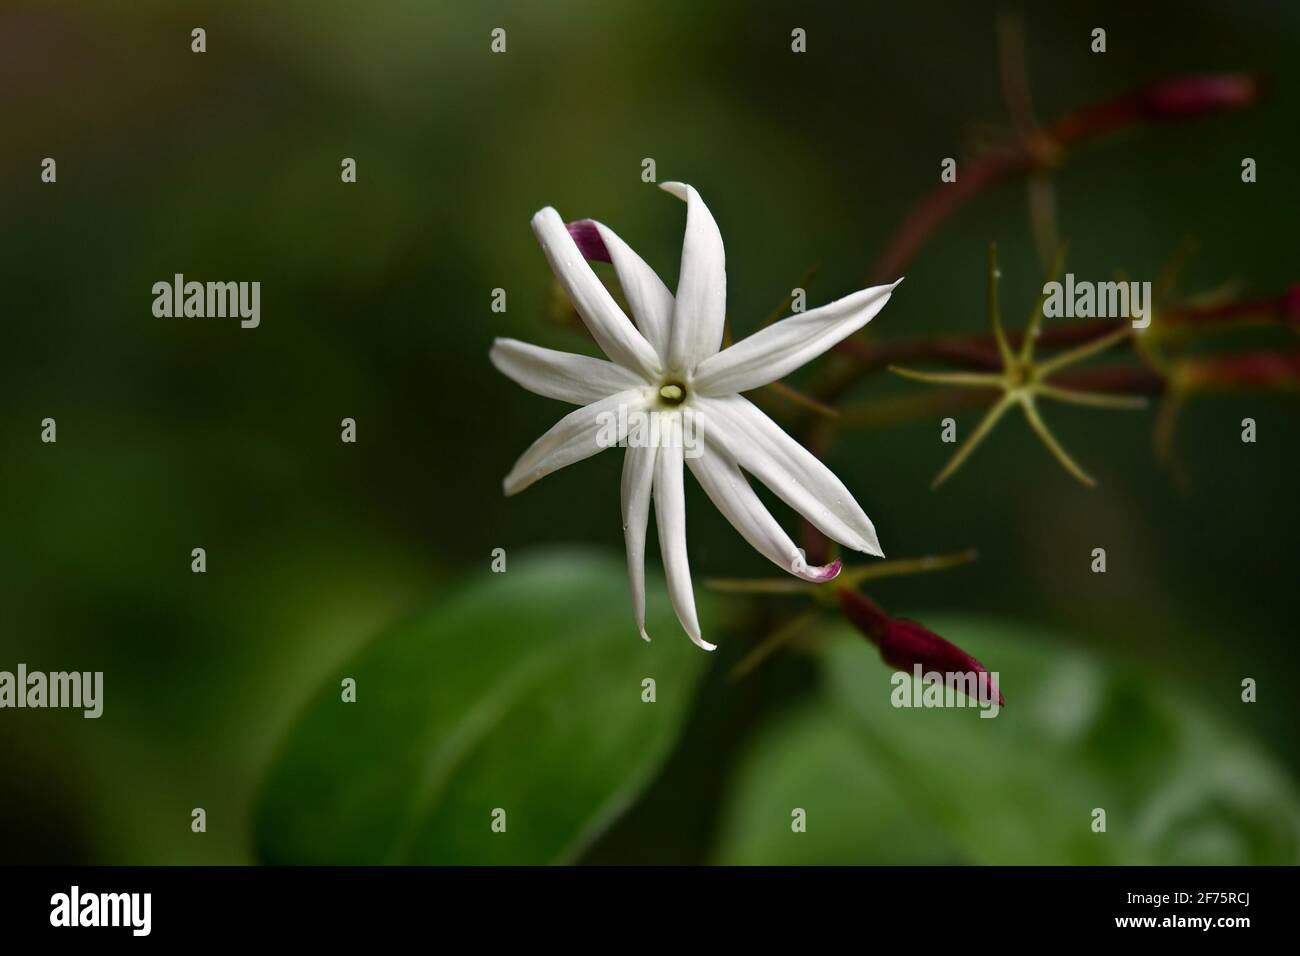 Jasminum nitidum (Angel wing jasmine) a tropical fragrant shrub with ivory-white dainty flowers on a natural green background. Stock Photo